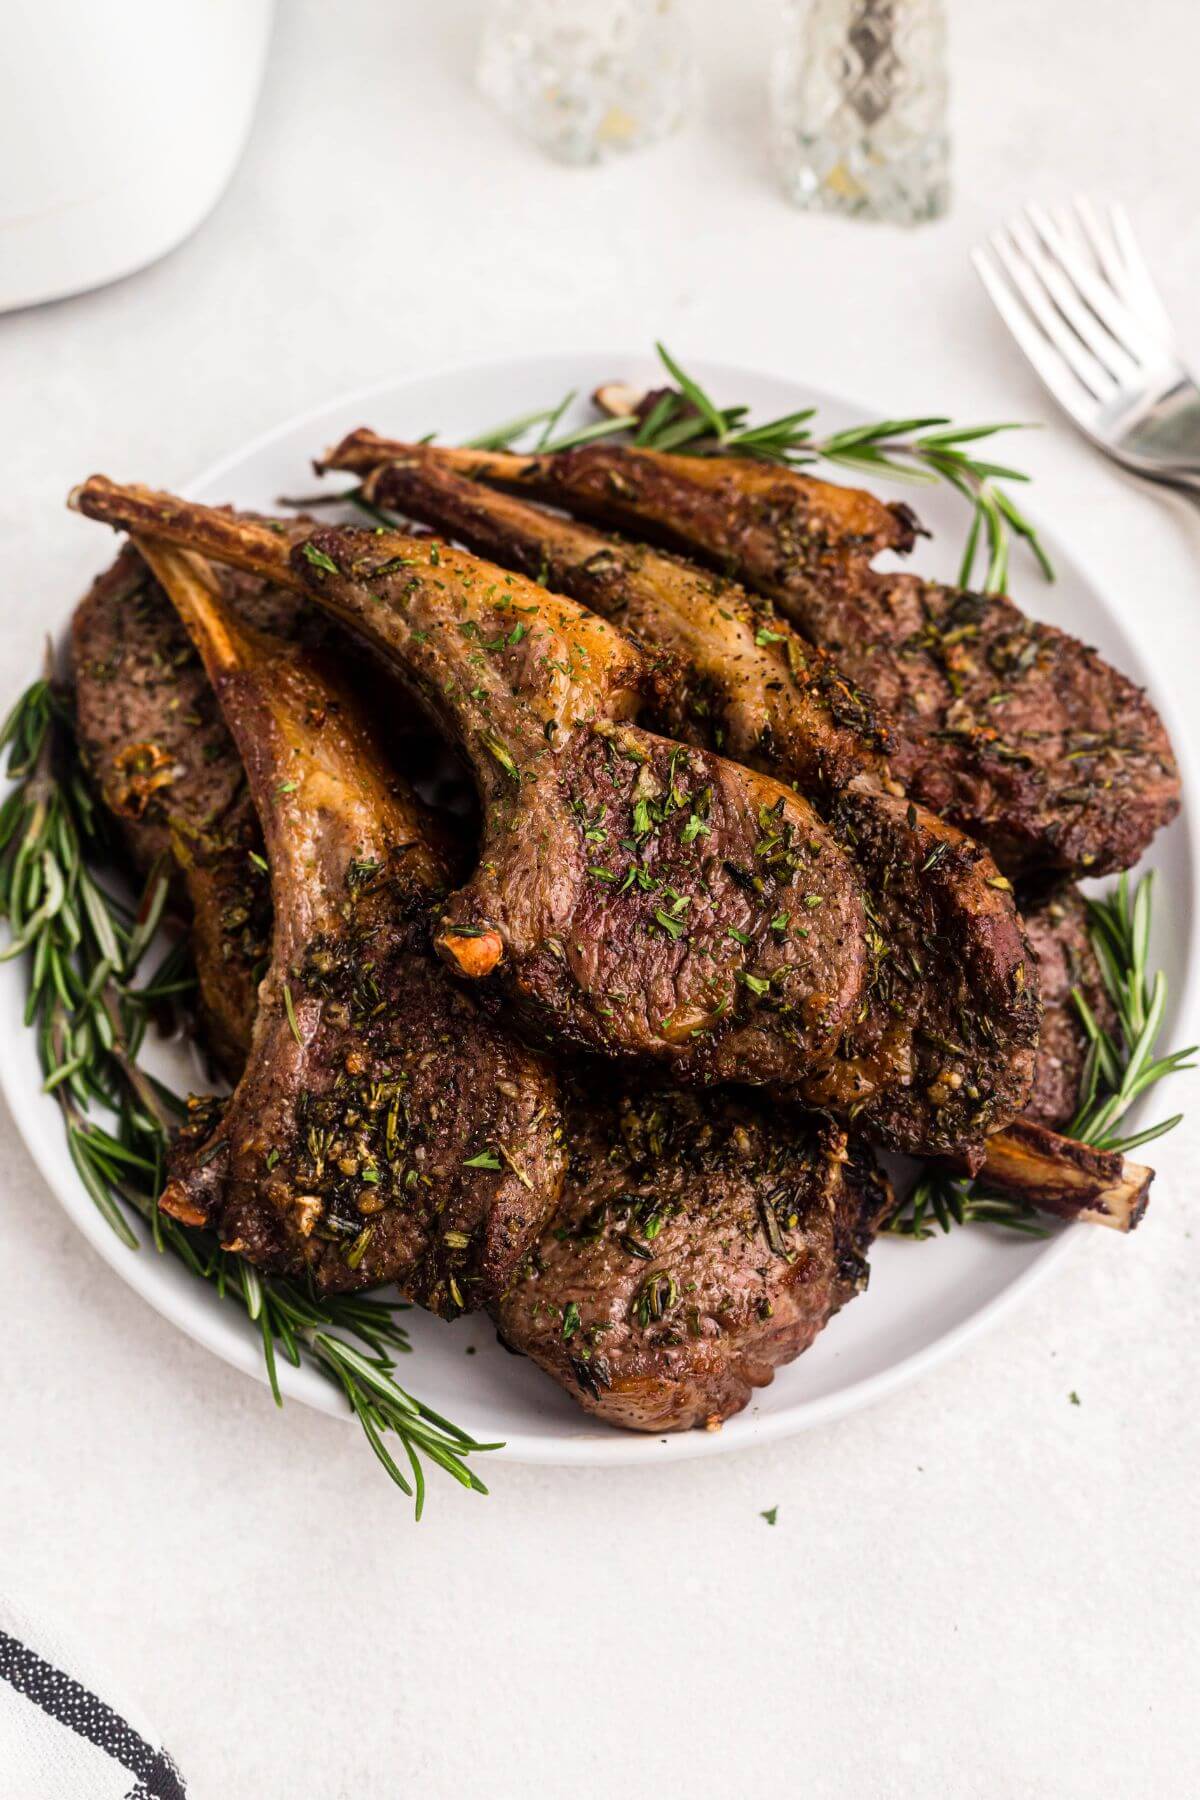 Brown and juicy lamb chops stacked on a white plate garnished